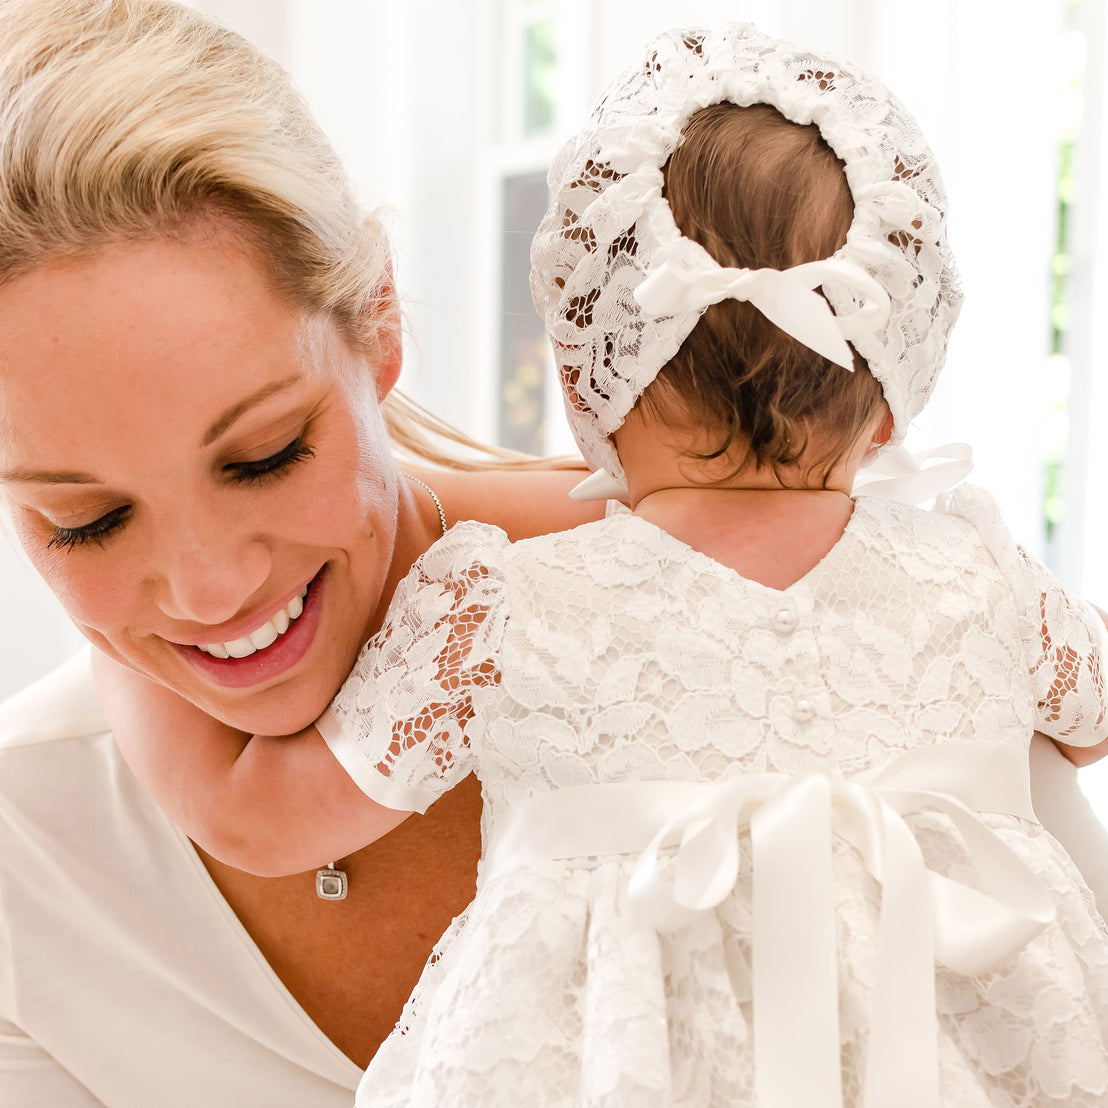 A joyful woman holding a baby girl in a traditional white Rose Lace Dress and matching Rose Lace Bonnet, both smiling in a brightly lit room.